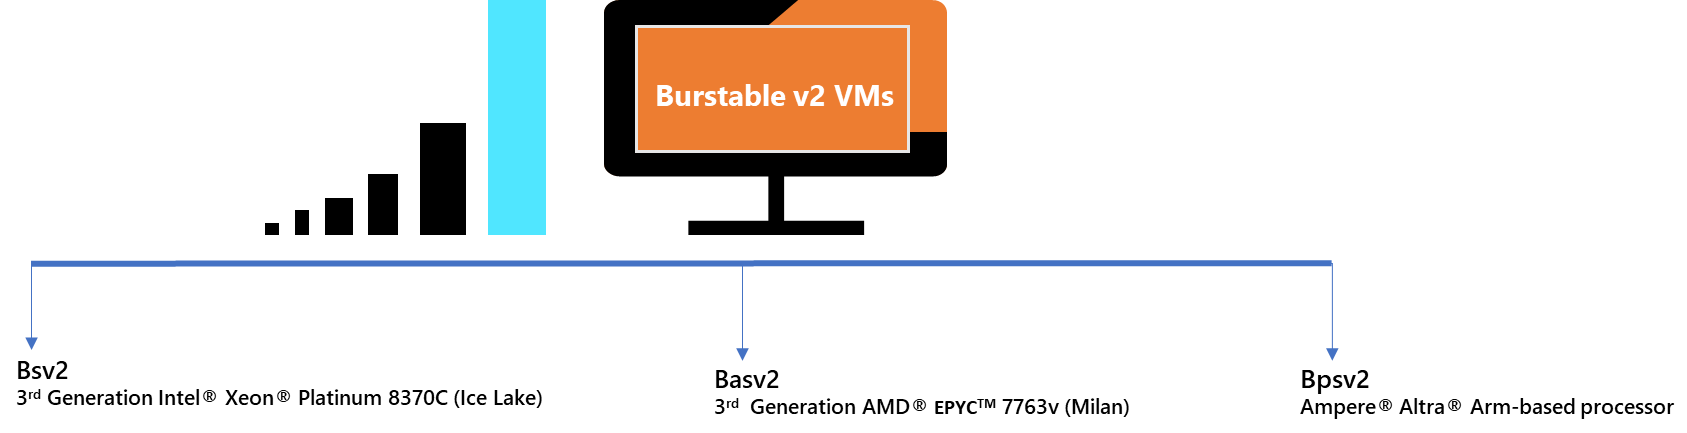 Announcing public preview of new burstable VMs - Bsv2, Basv2 and Bpsv2